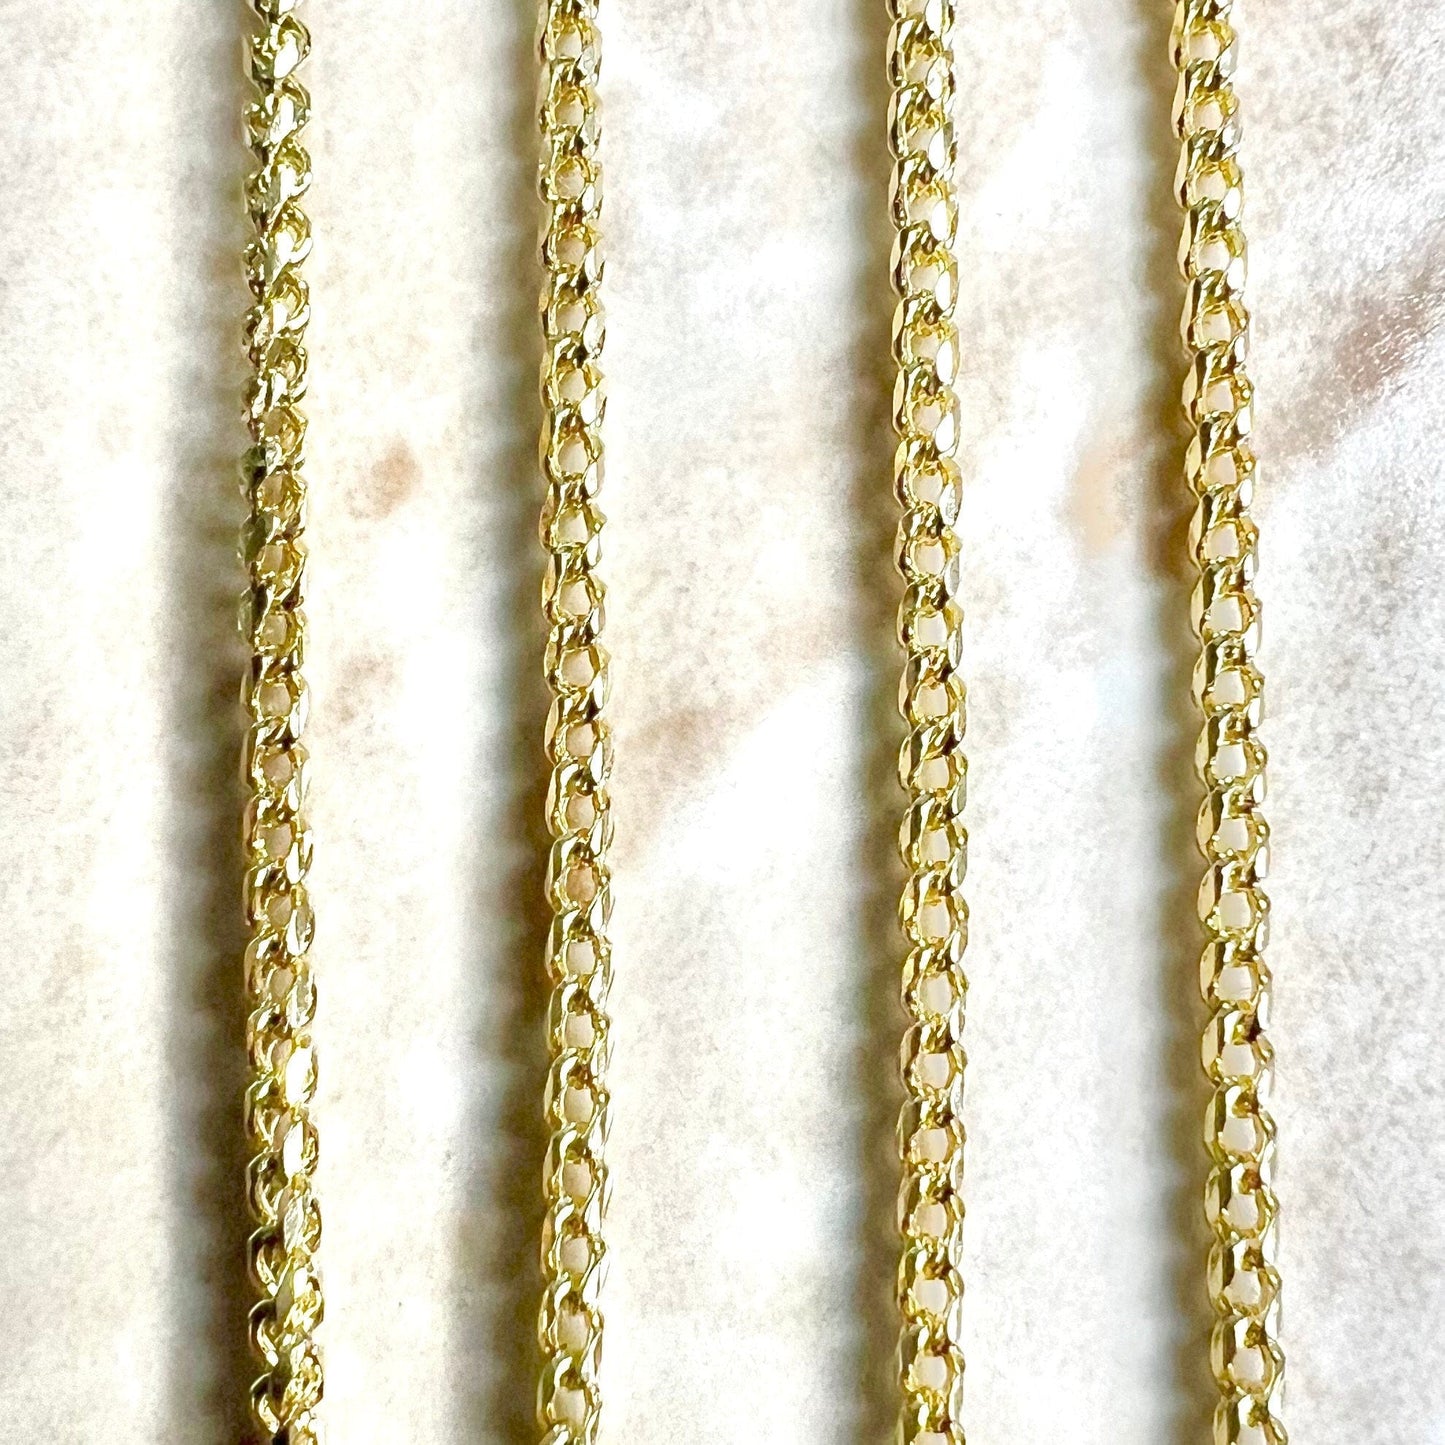 Solid 14K Gold Franco Chain Necklace - 22 Inch Gold Chain Necklace - 14K Yellow Gold Necklace - 14K Solid Gold Chain - Gift For Him & Her